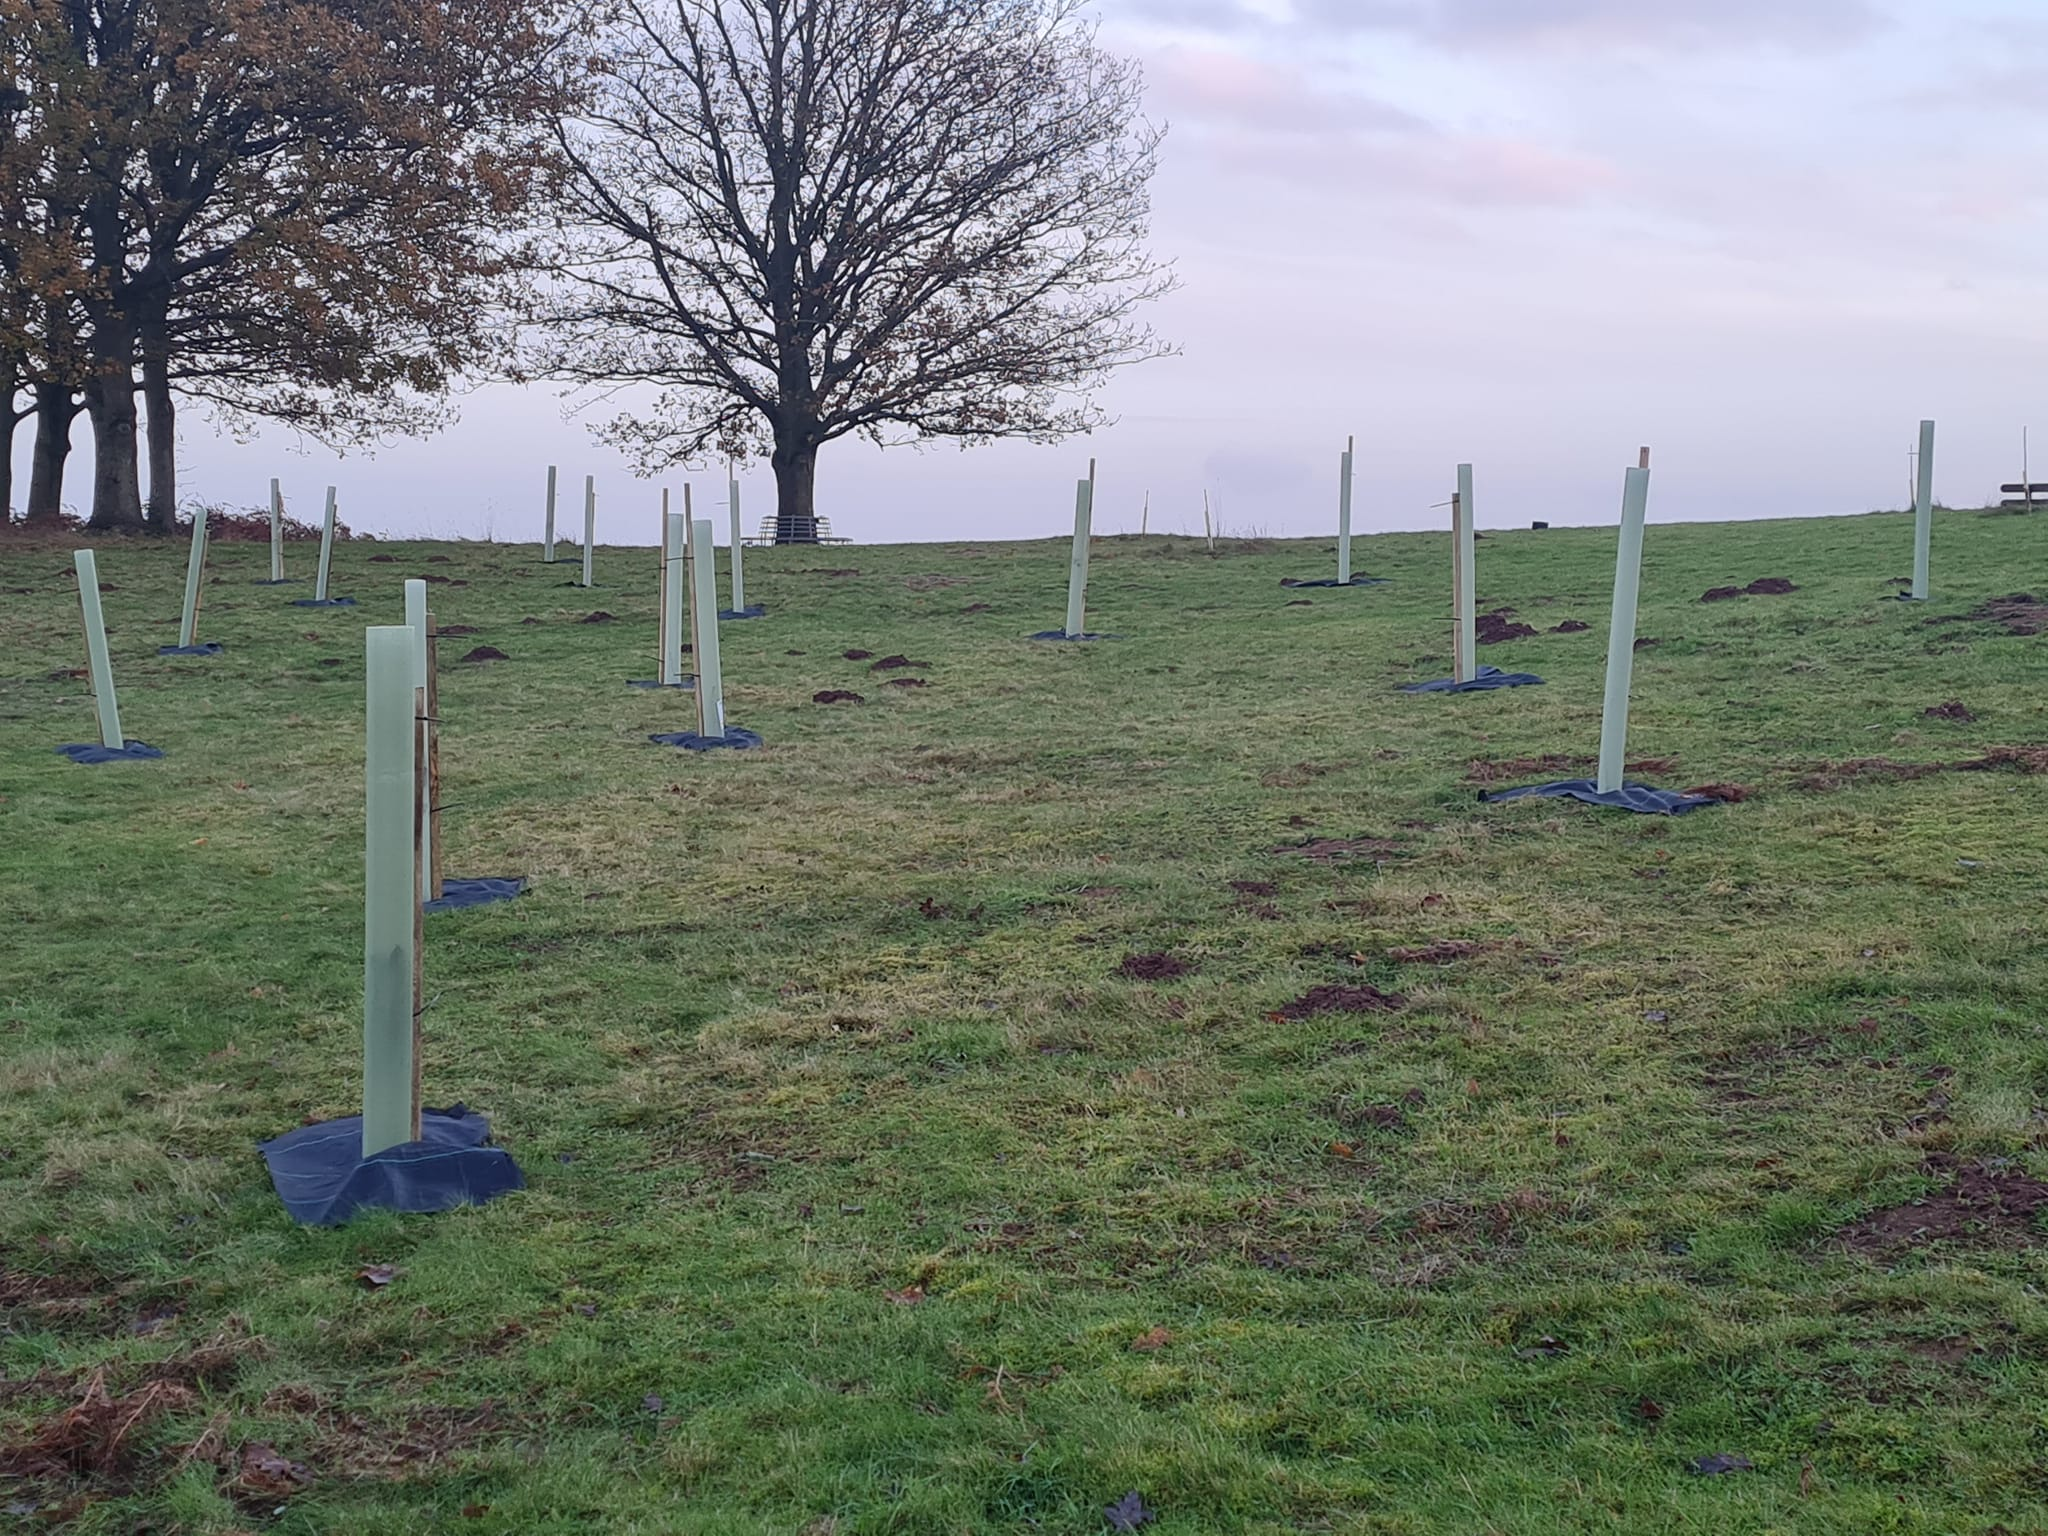 Tree planting on the common